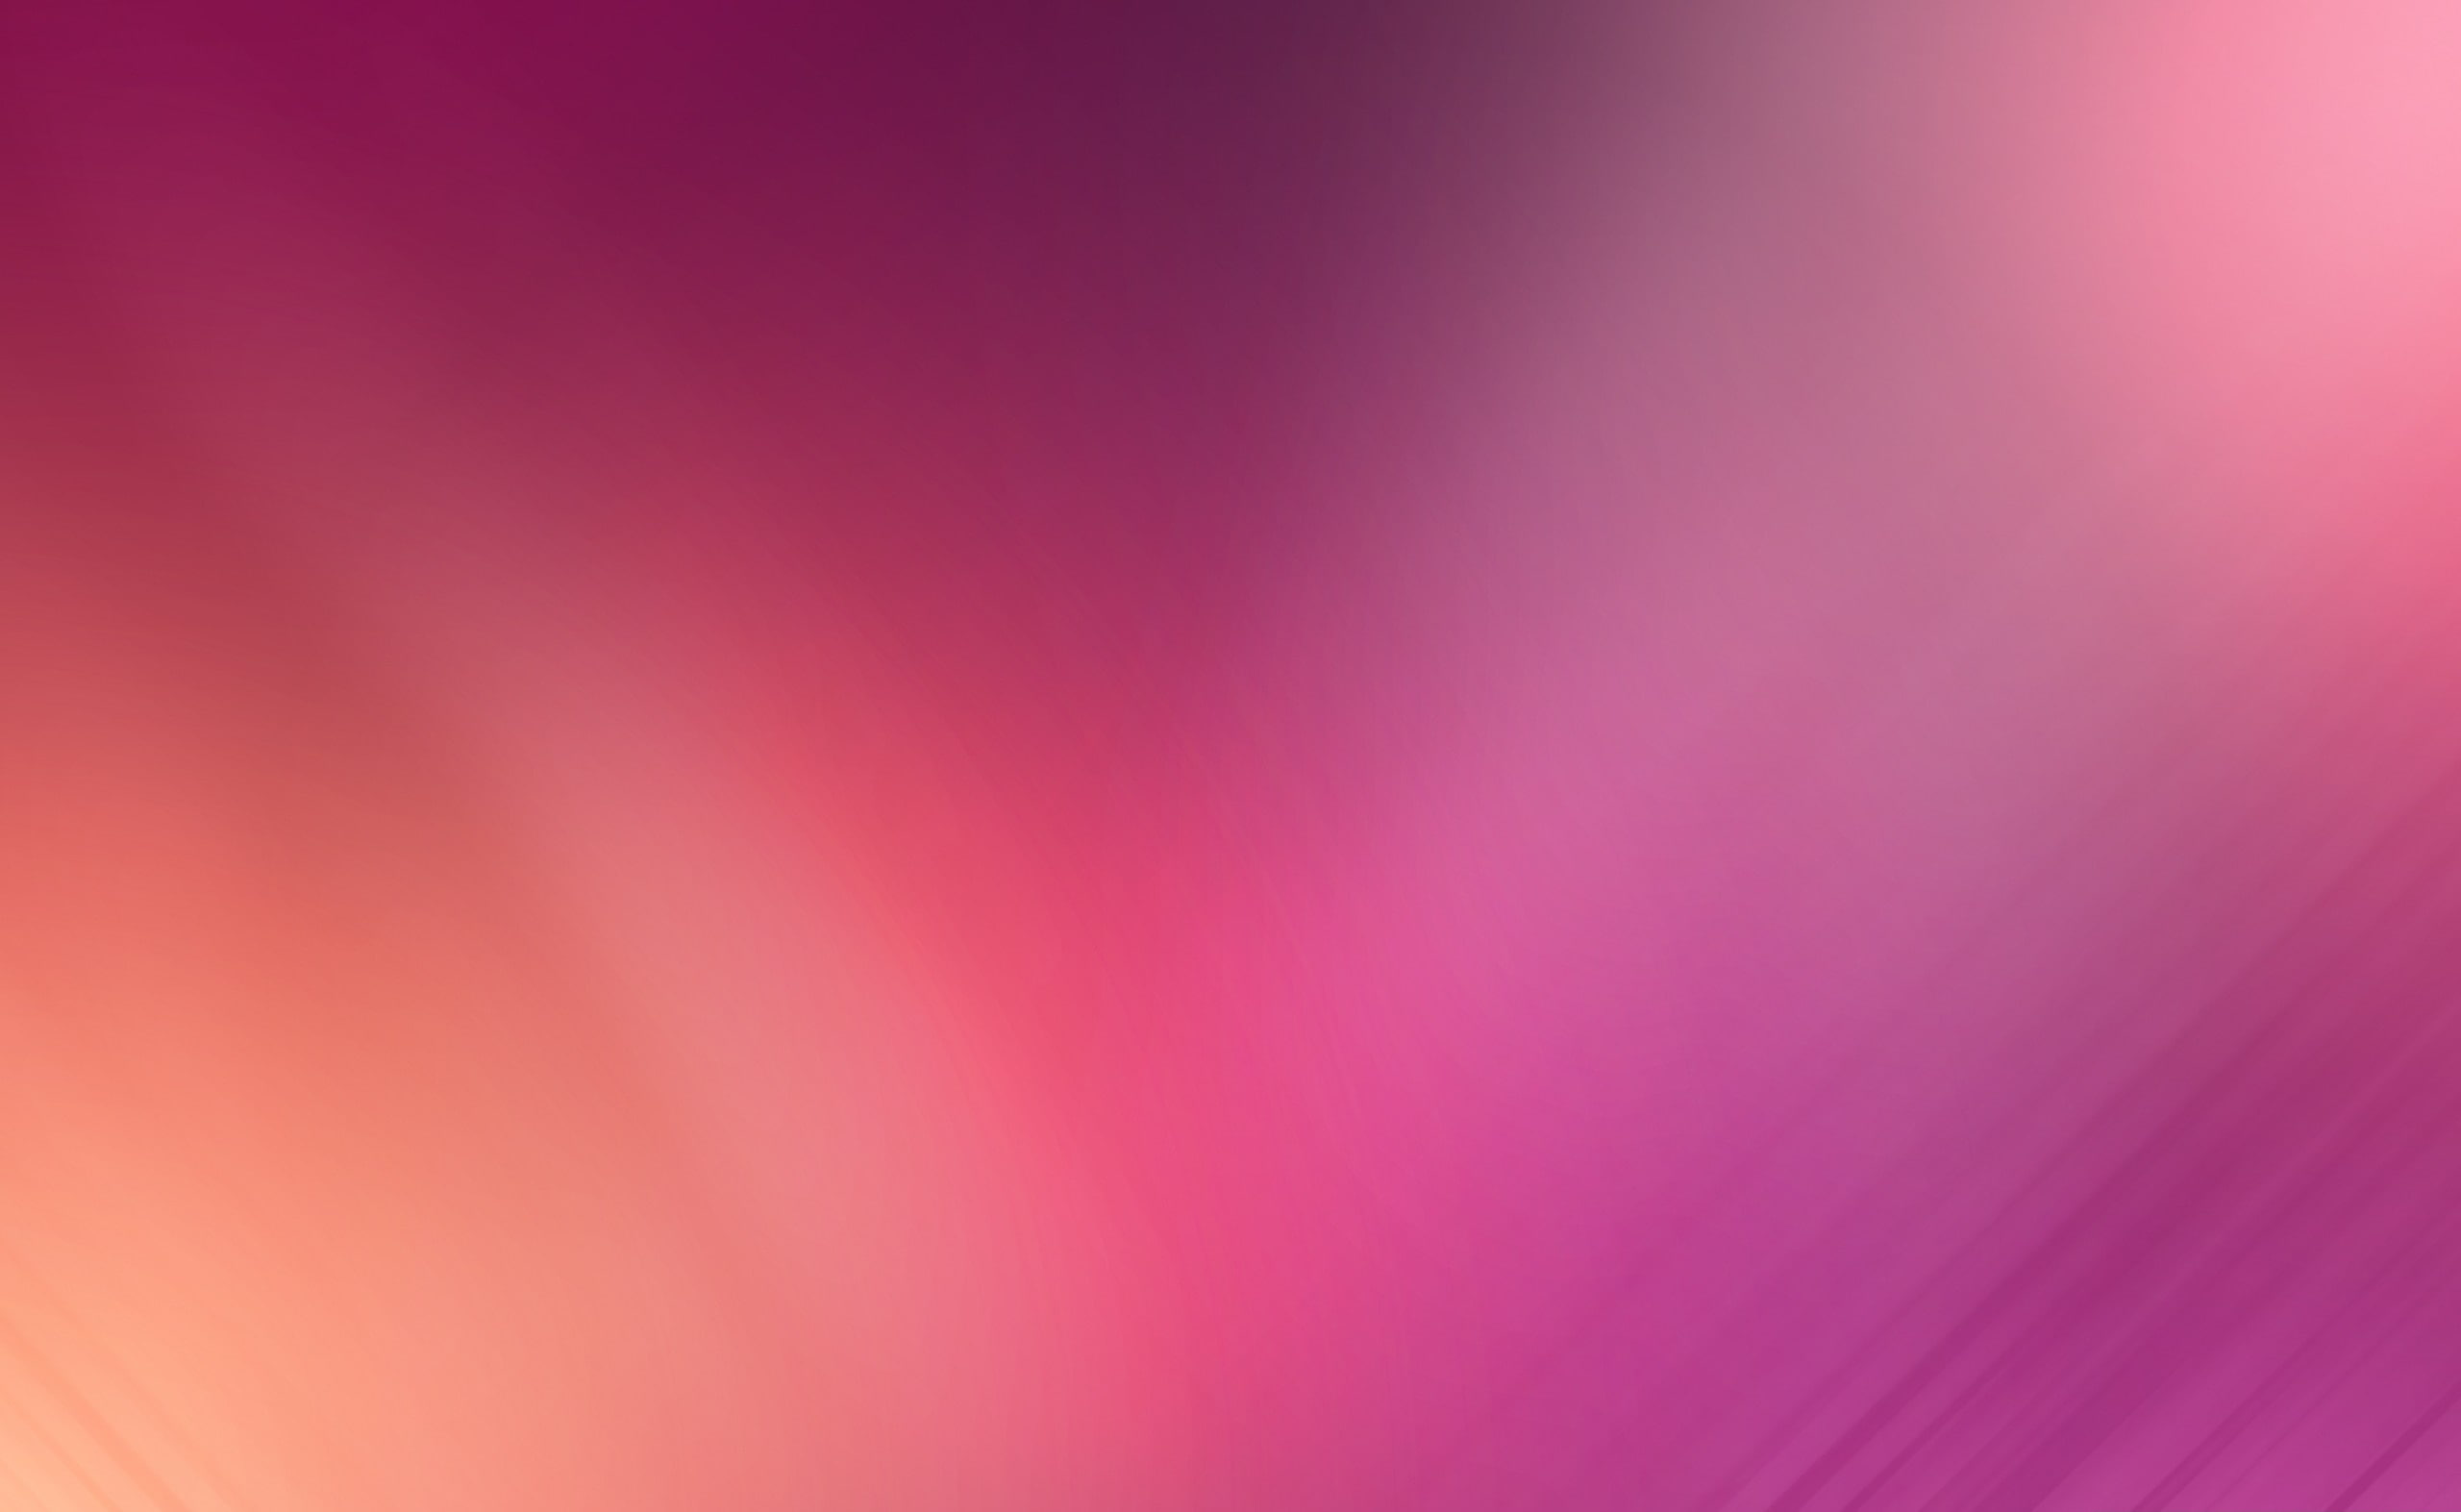 Lila, Aero, Colorful, pink color, backgrounds, full frame, abstract